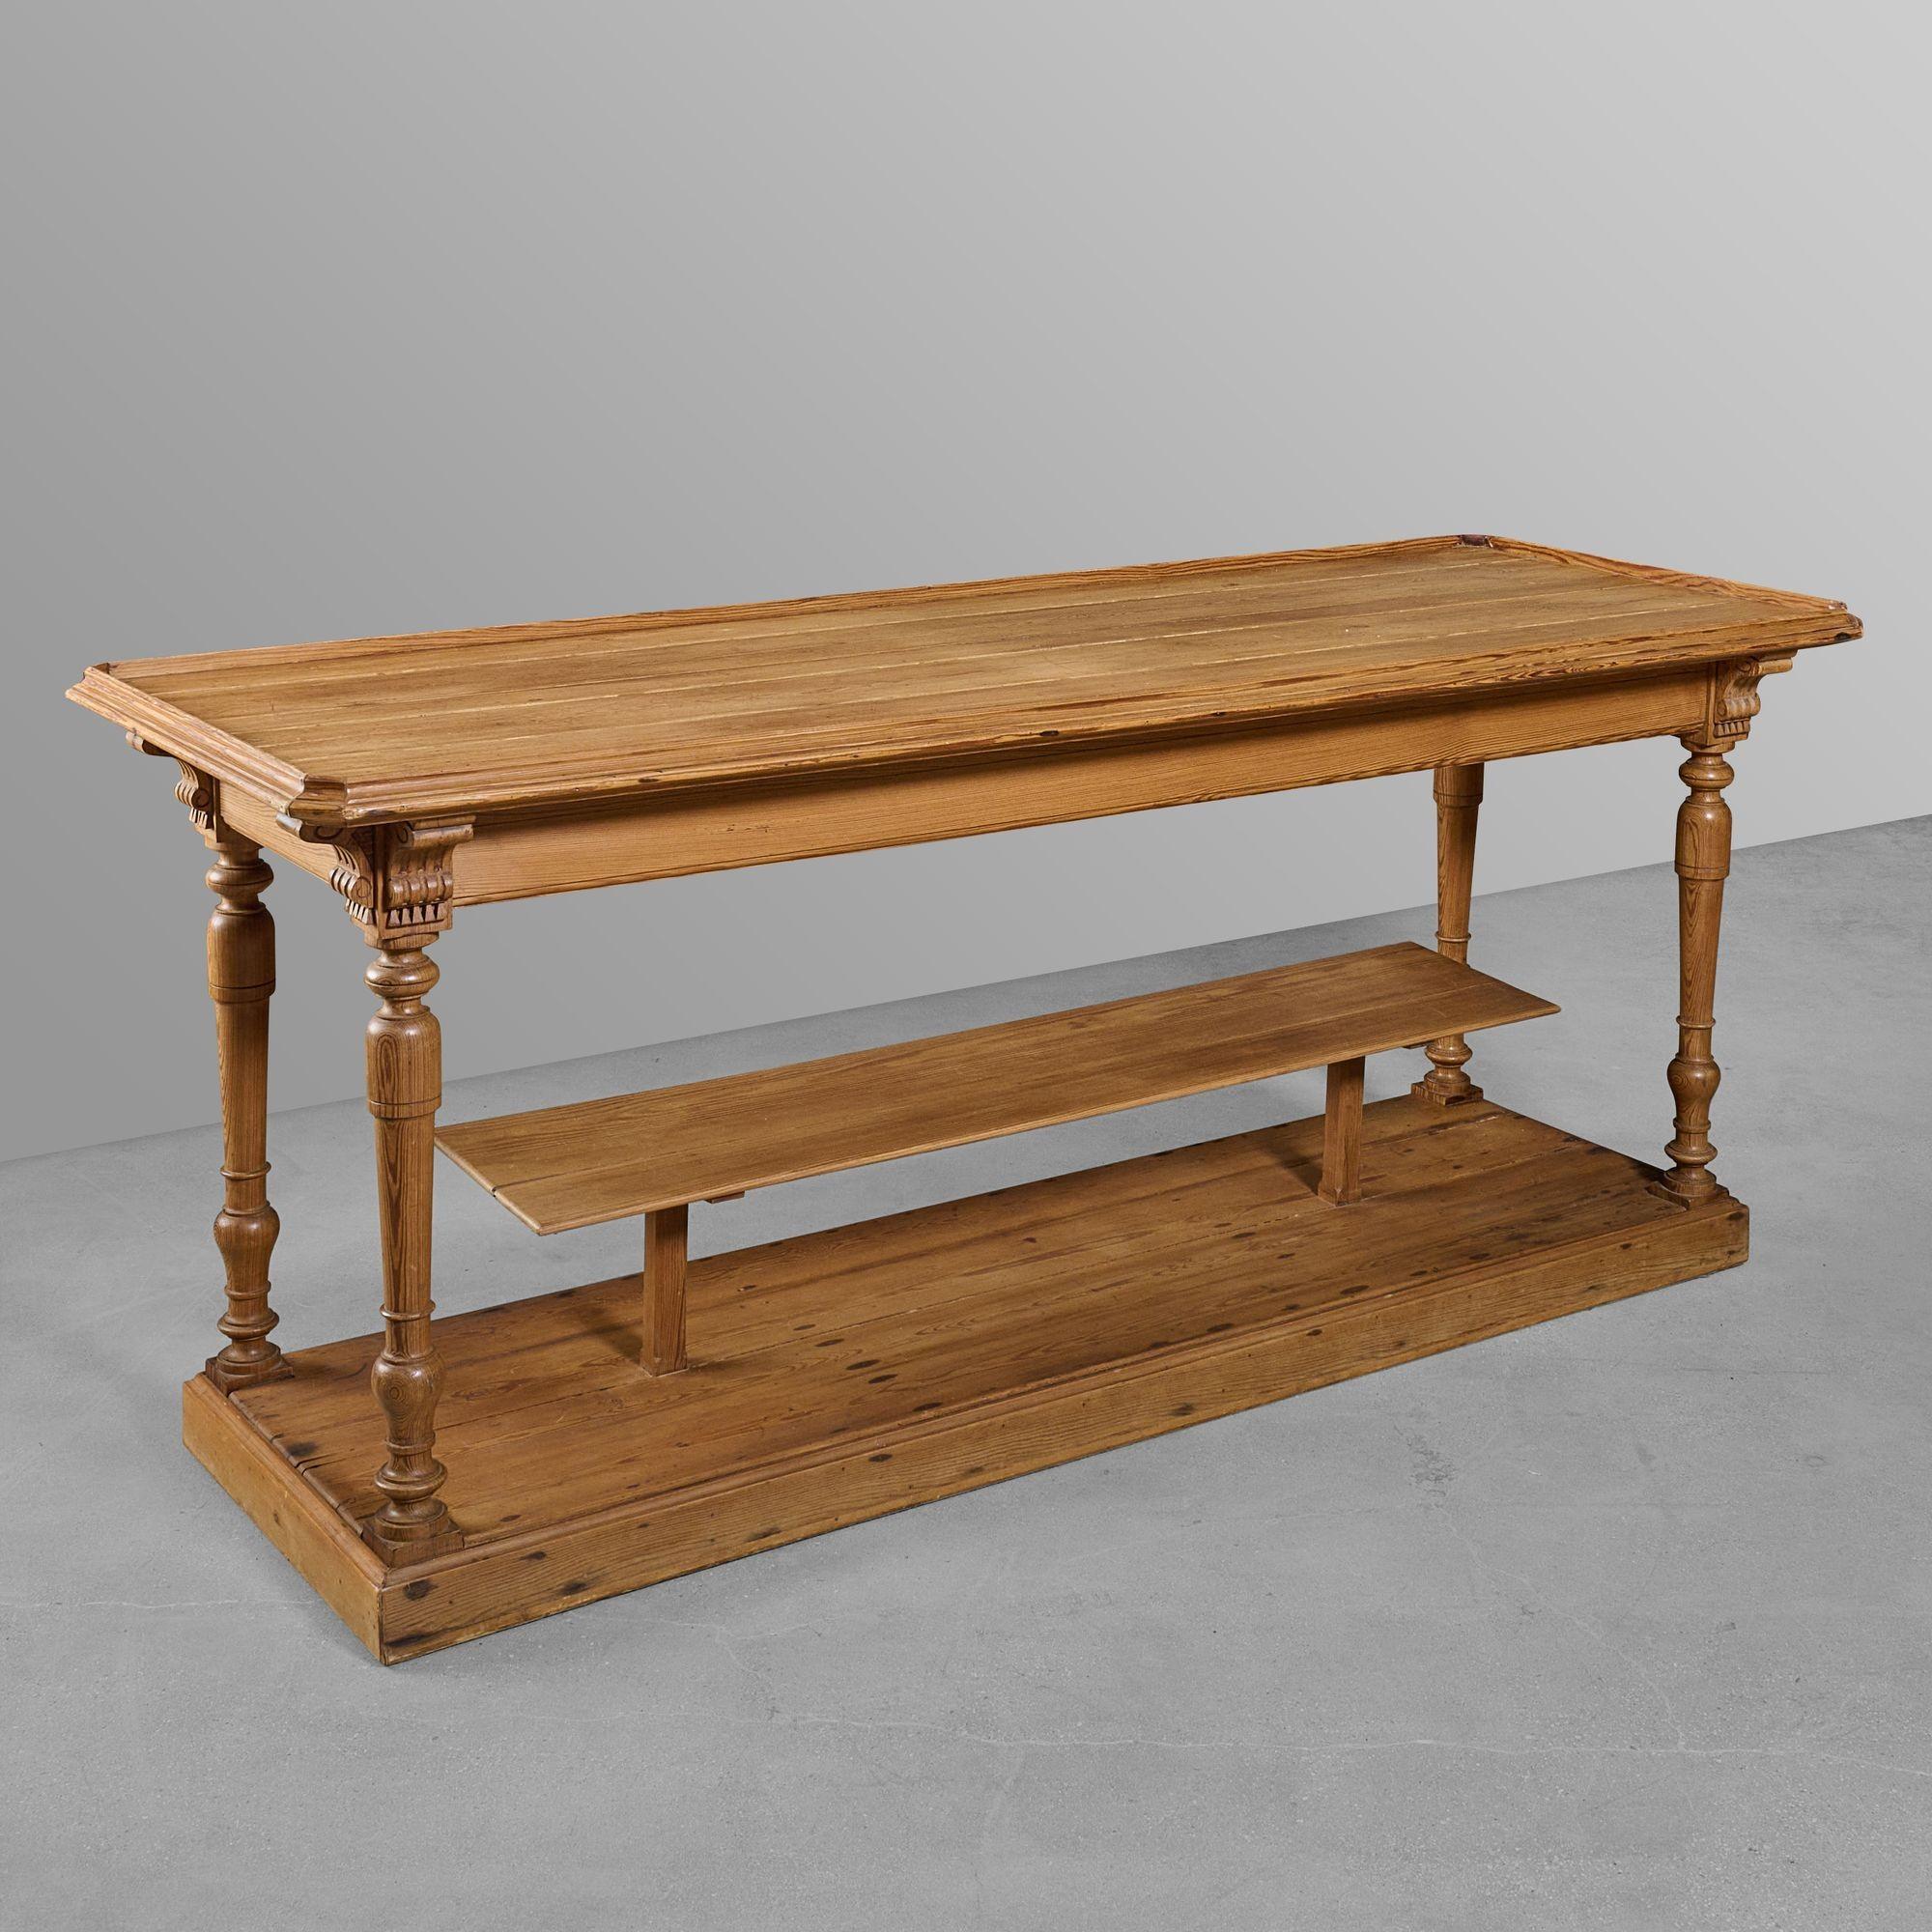 Tier pine table with great legs & cute center tier display shelf. From a Paris hat shop.